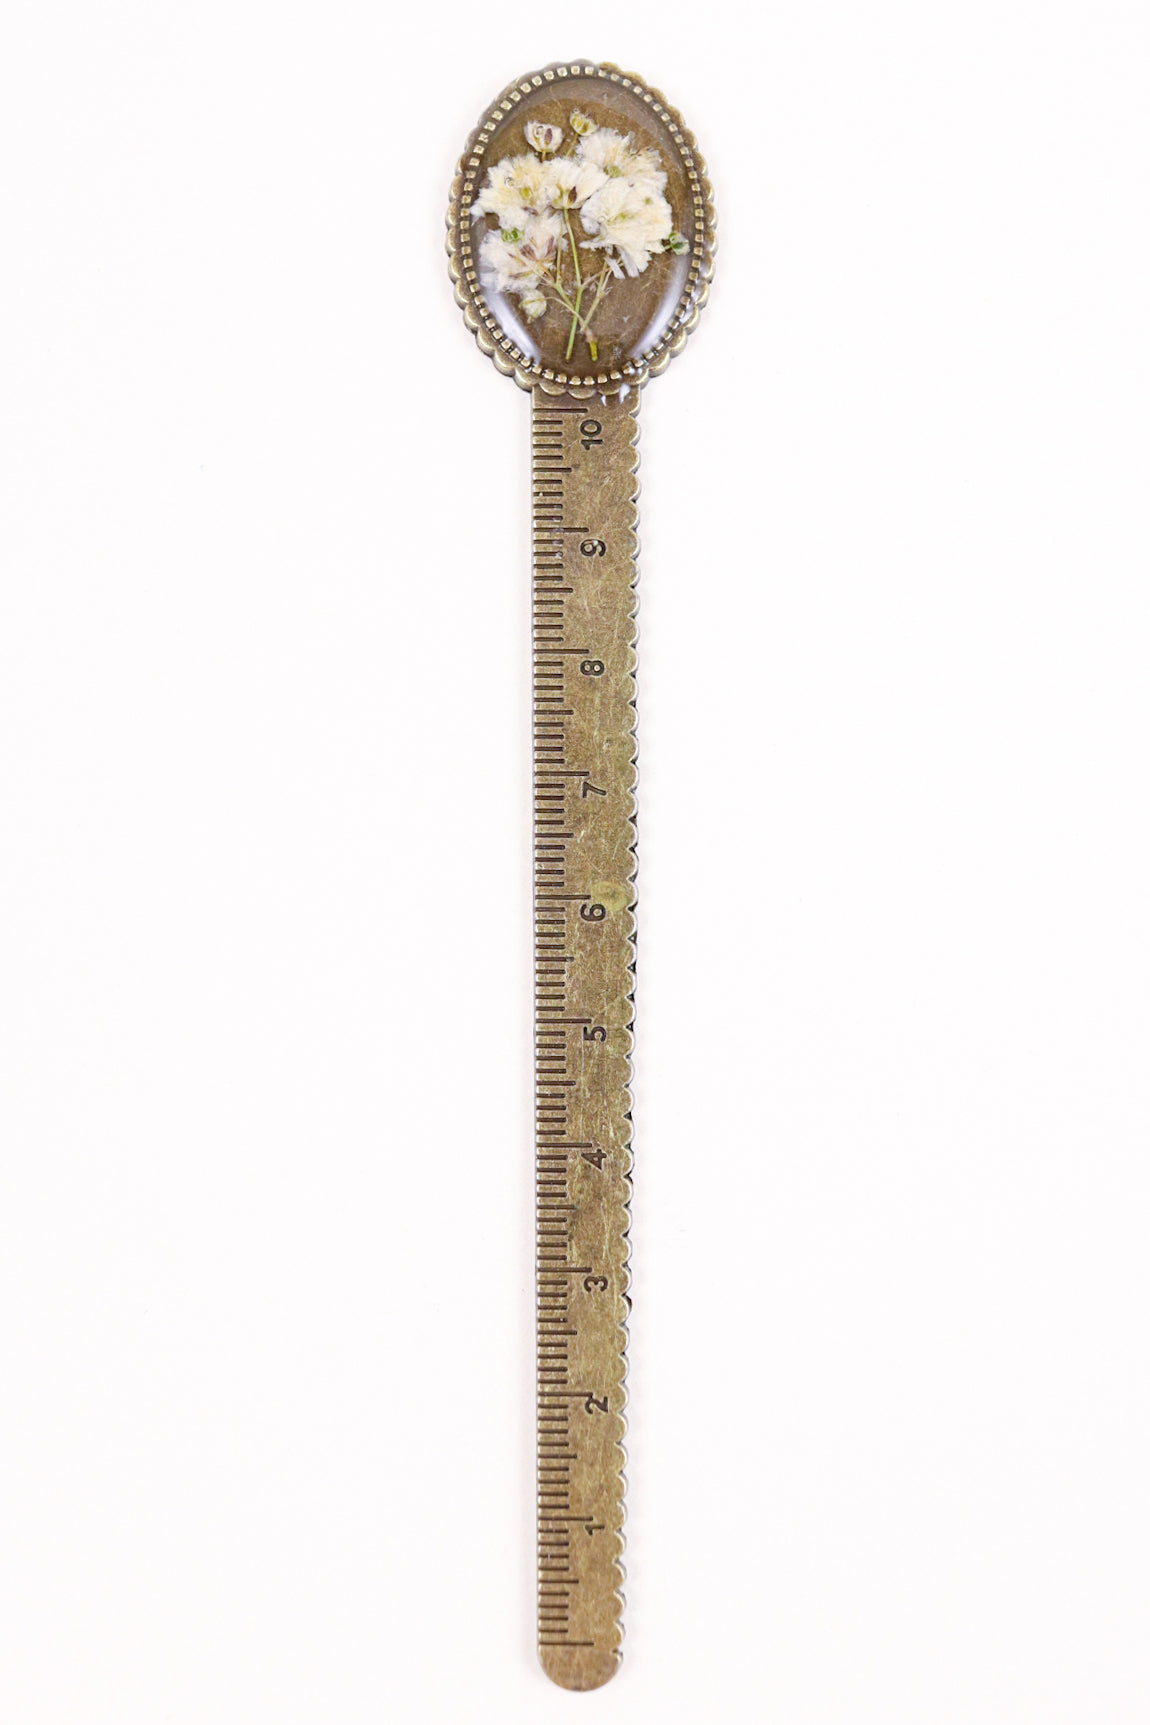 Vintage Bronze Resin Ruler Bookmark With Baby's Breath Flowers